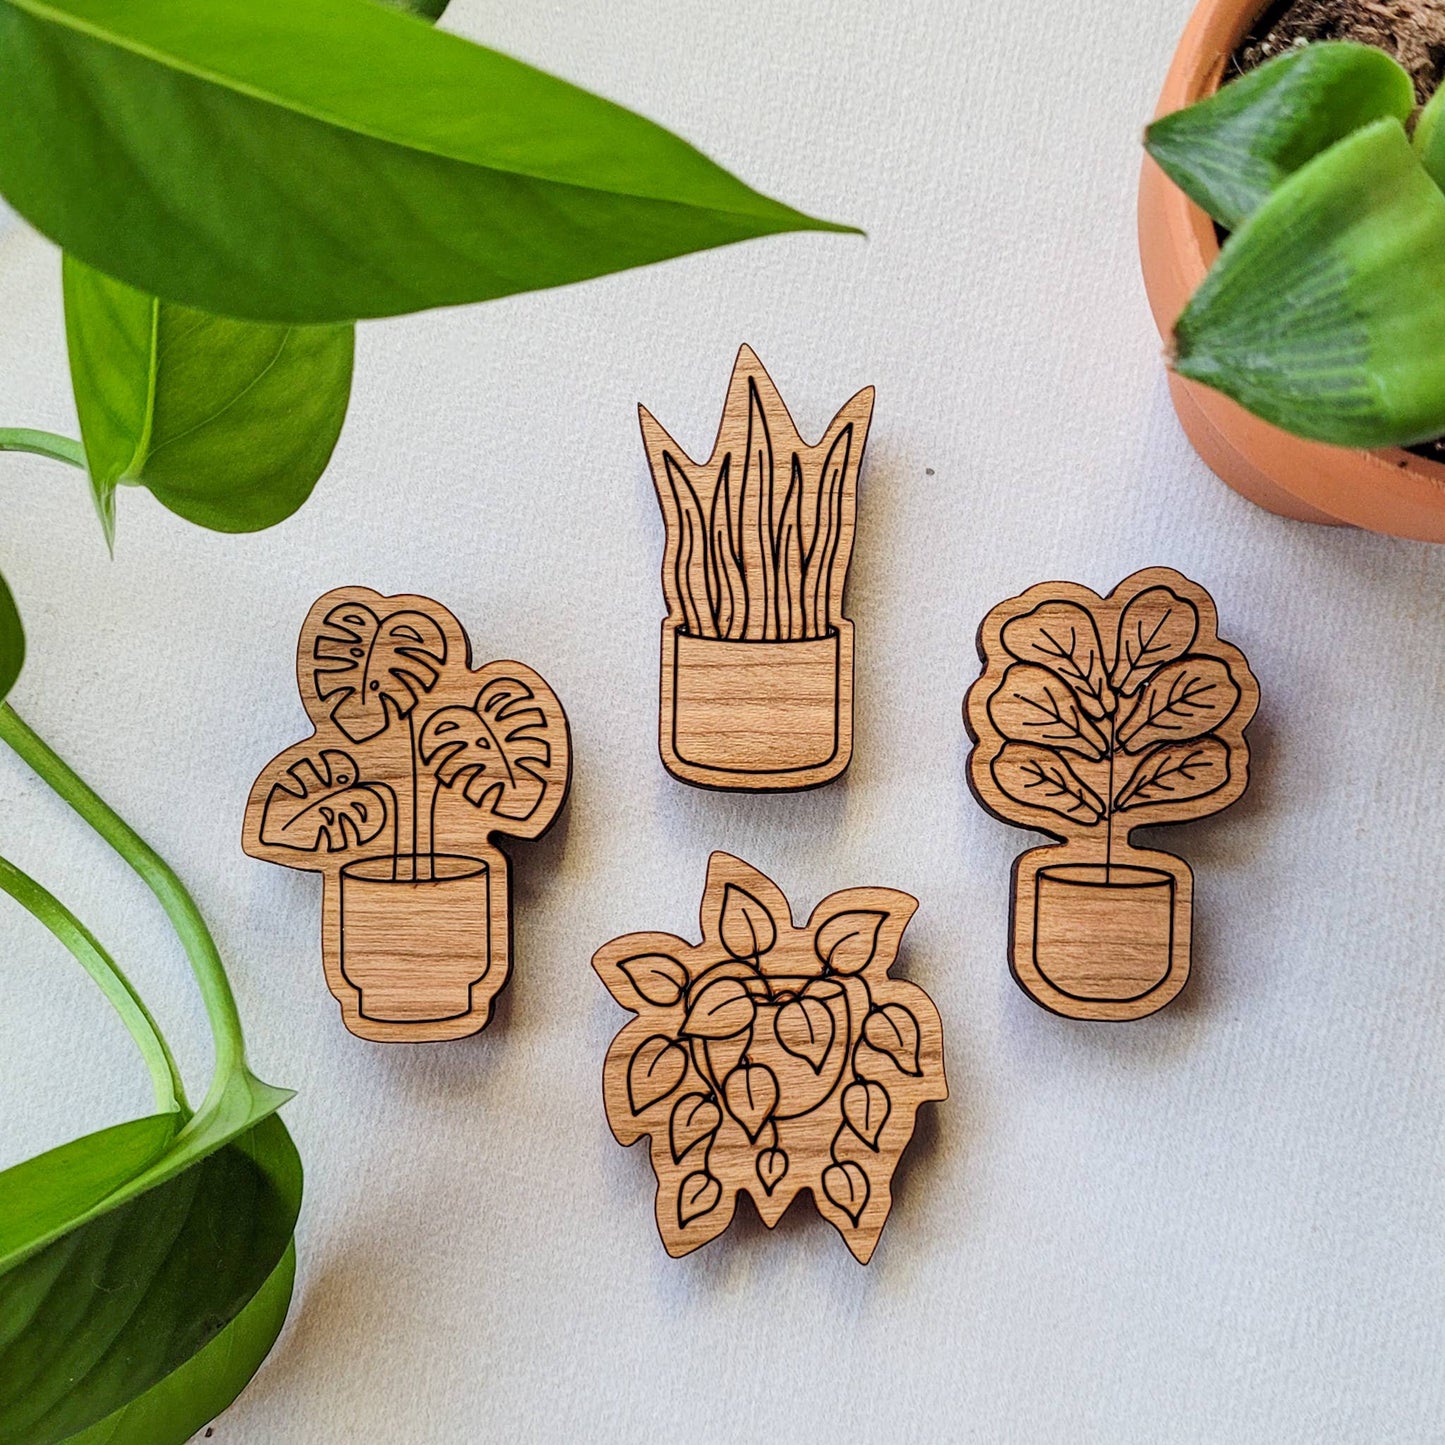 Houseplant Magnets (Sets of 4) - Wood Engraved